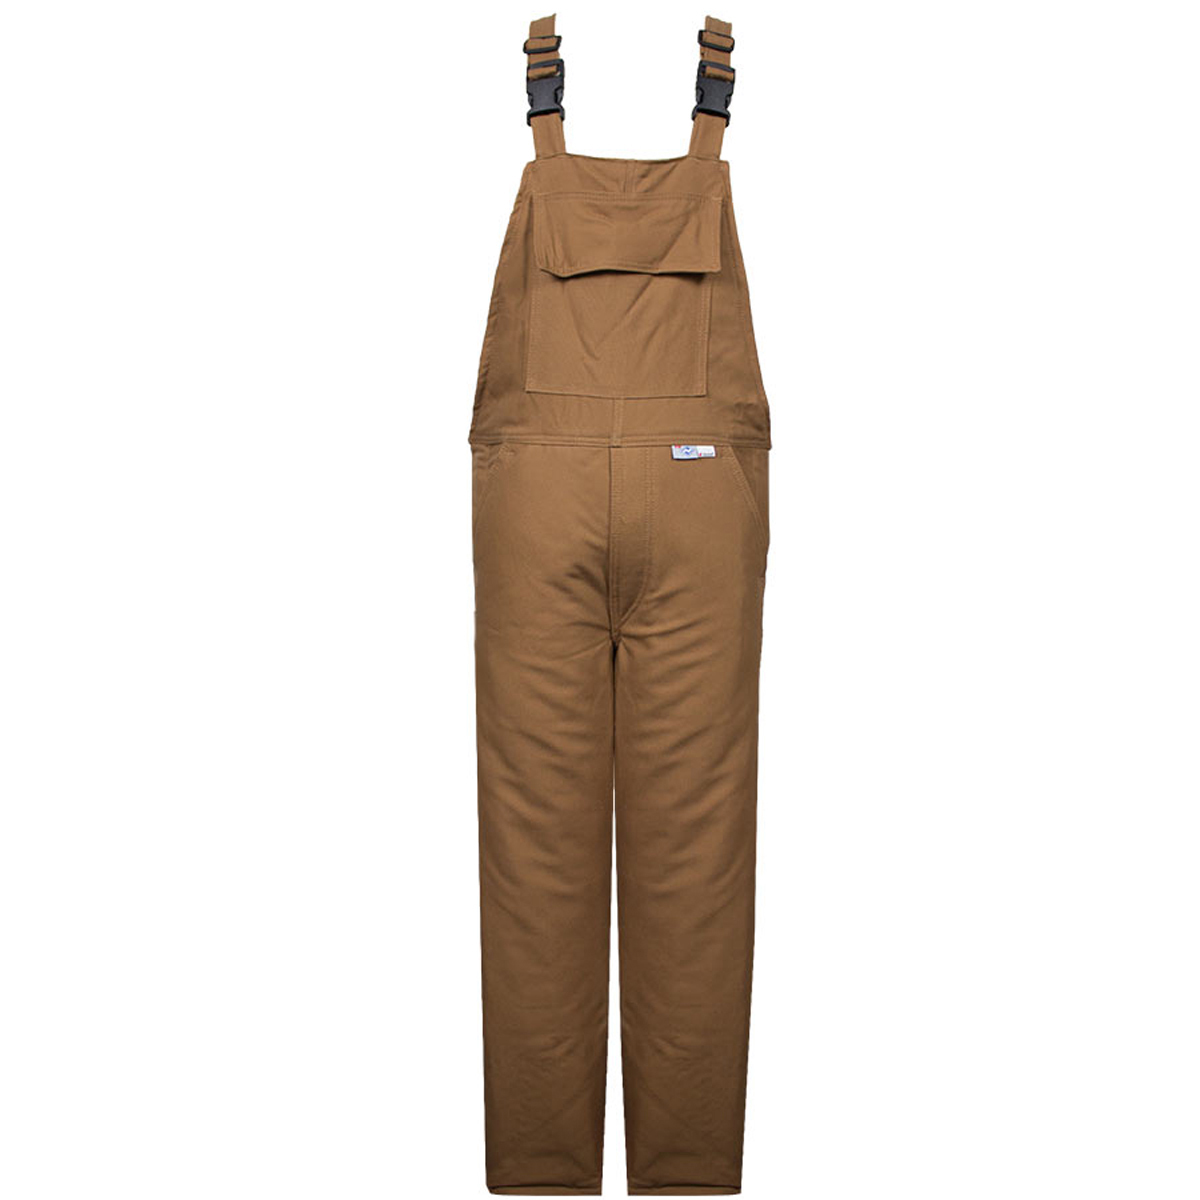 National Safety Apparel Large Regular Brown Westex UltraSoft® Duck/DWR Flame Resistant Bib Overall FR Quilted Lining With Zipper